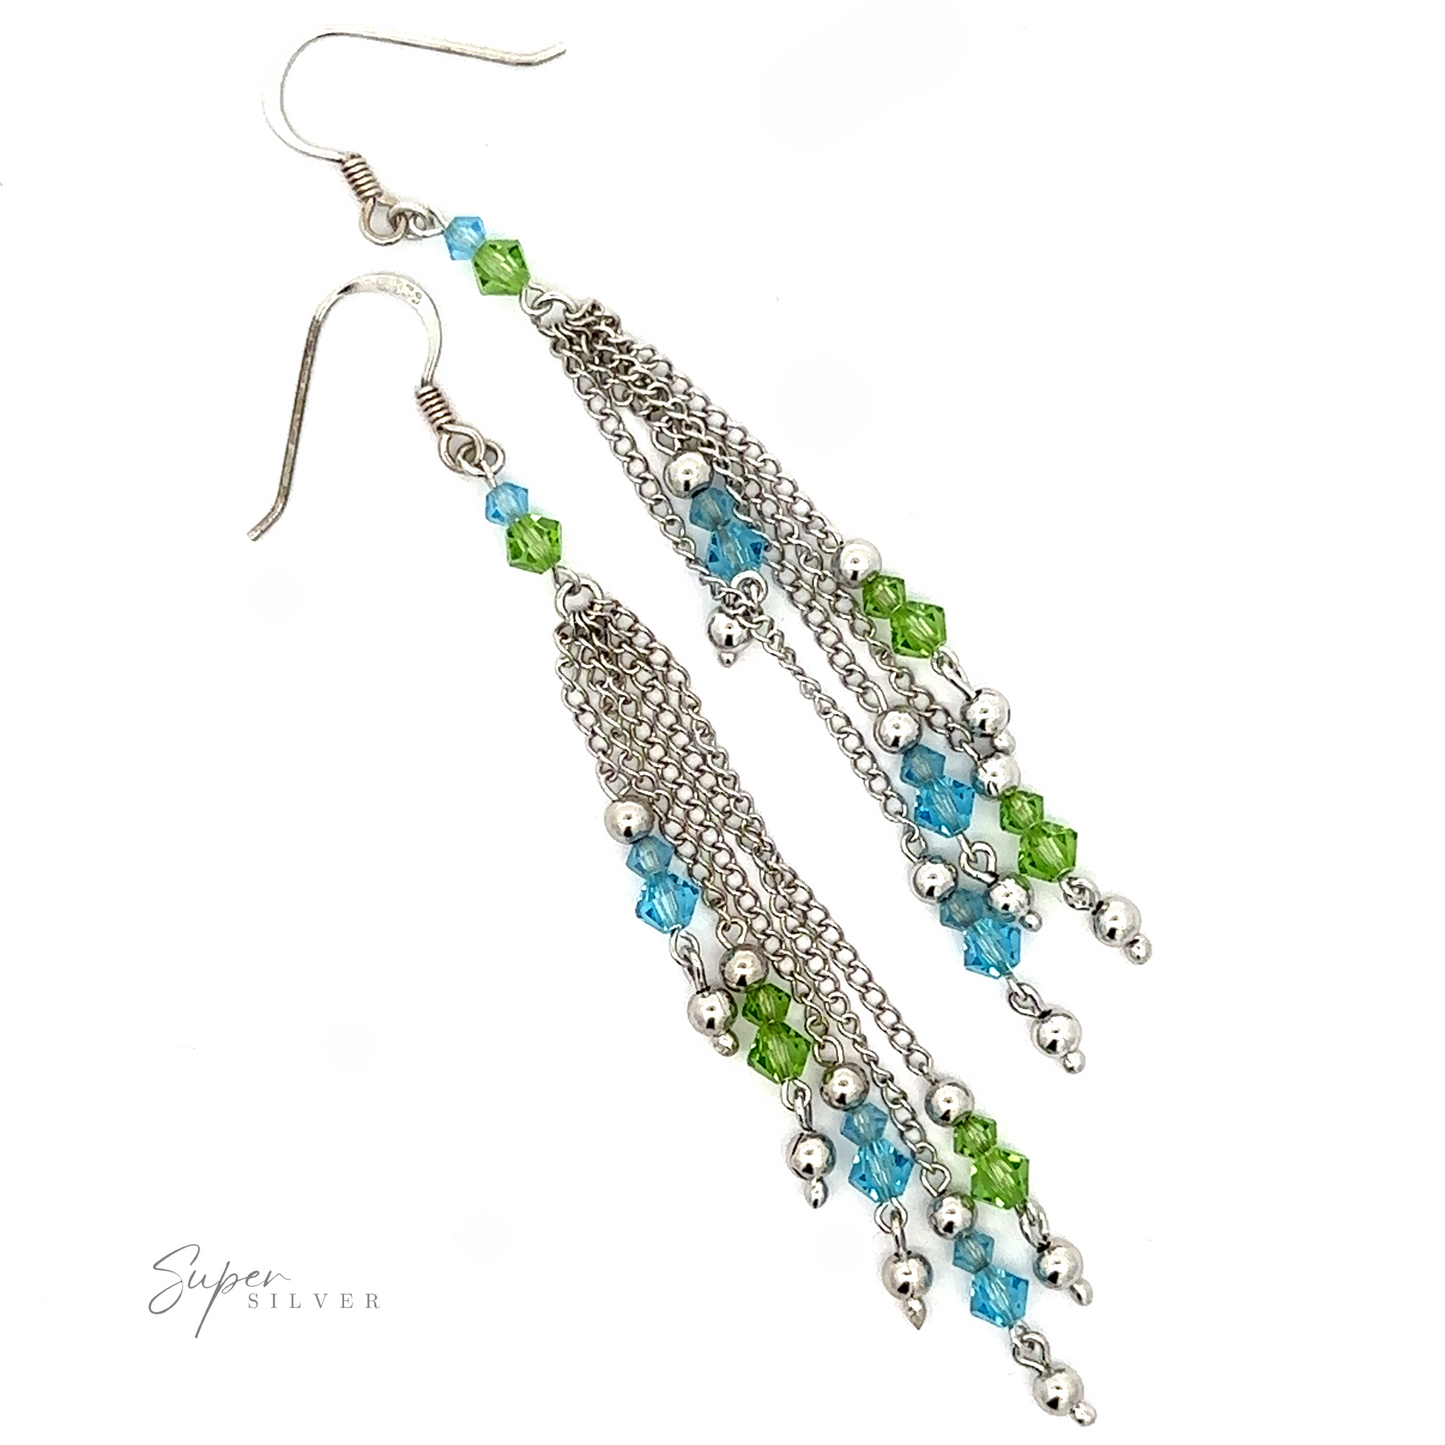 
                  
                    A pair of Layered Earrings with Multicolored Beads with blue, green, and clear crystal beads and multiple chains on a white background. The "Super Silver" logo is in the bottom left corner.
                  
                